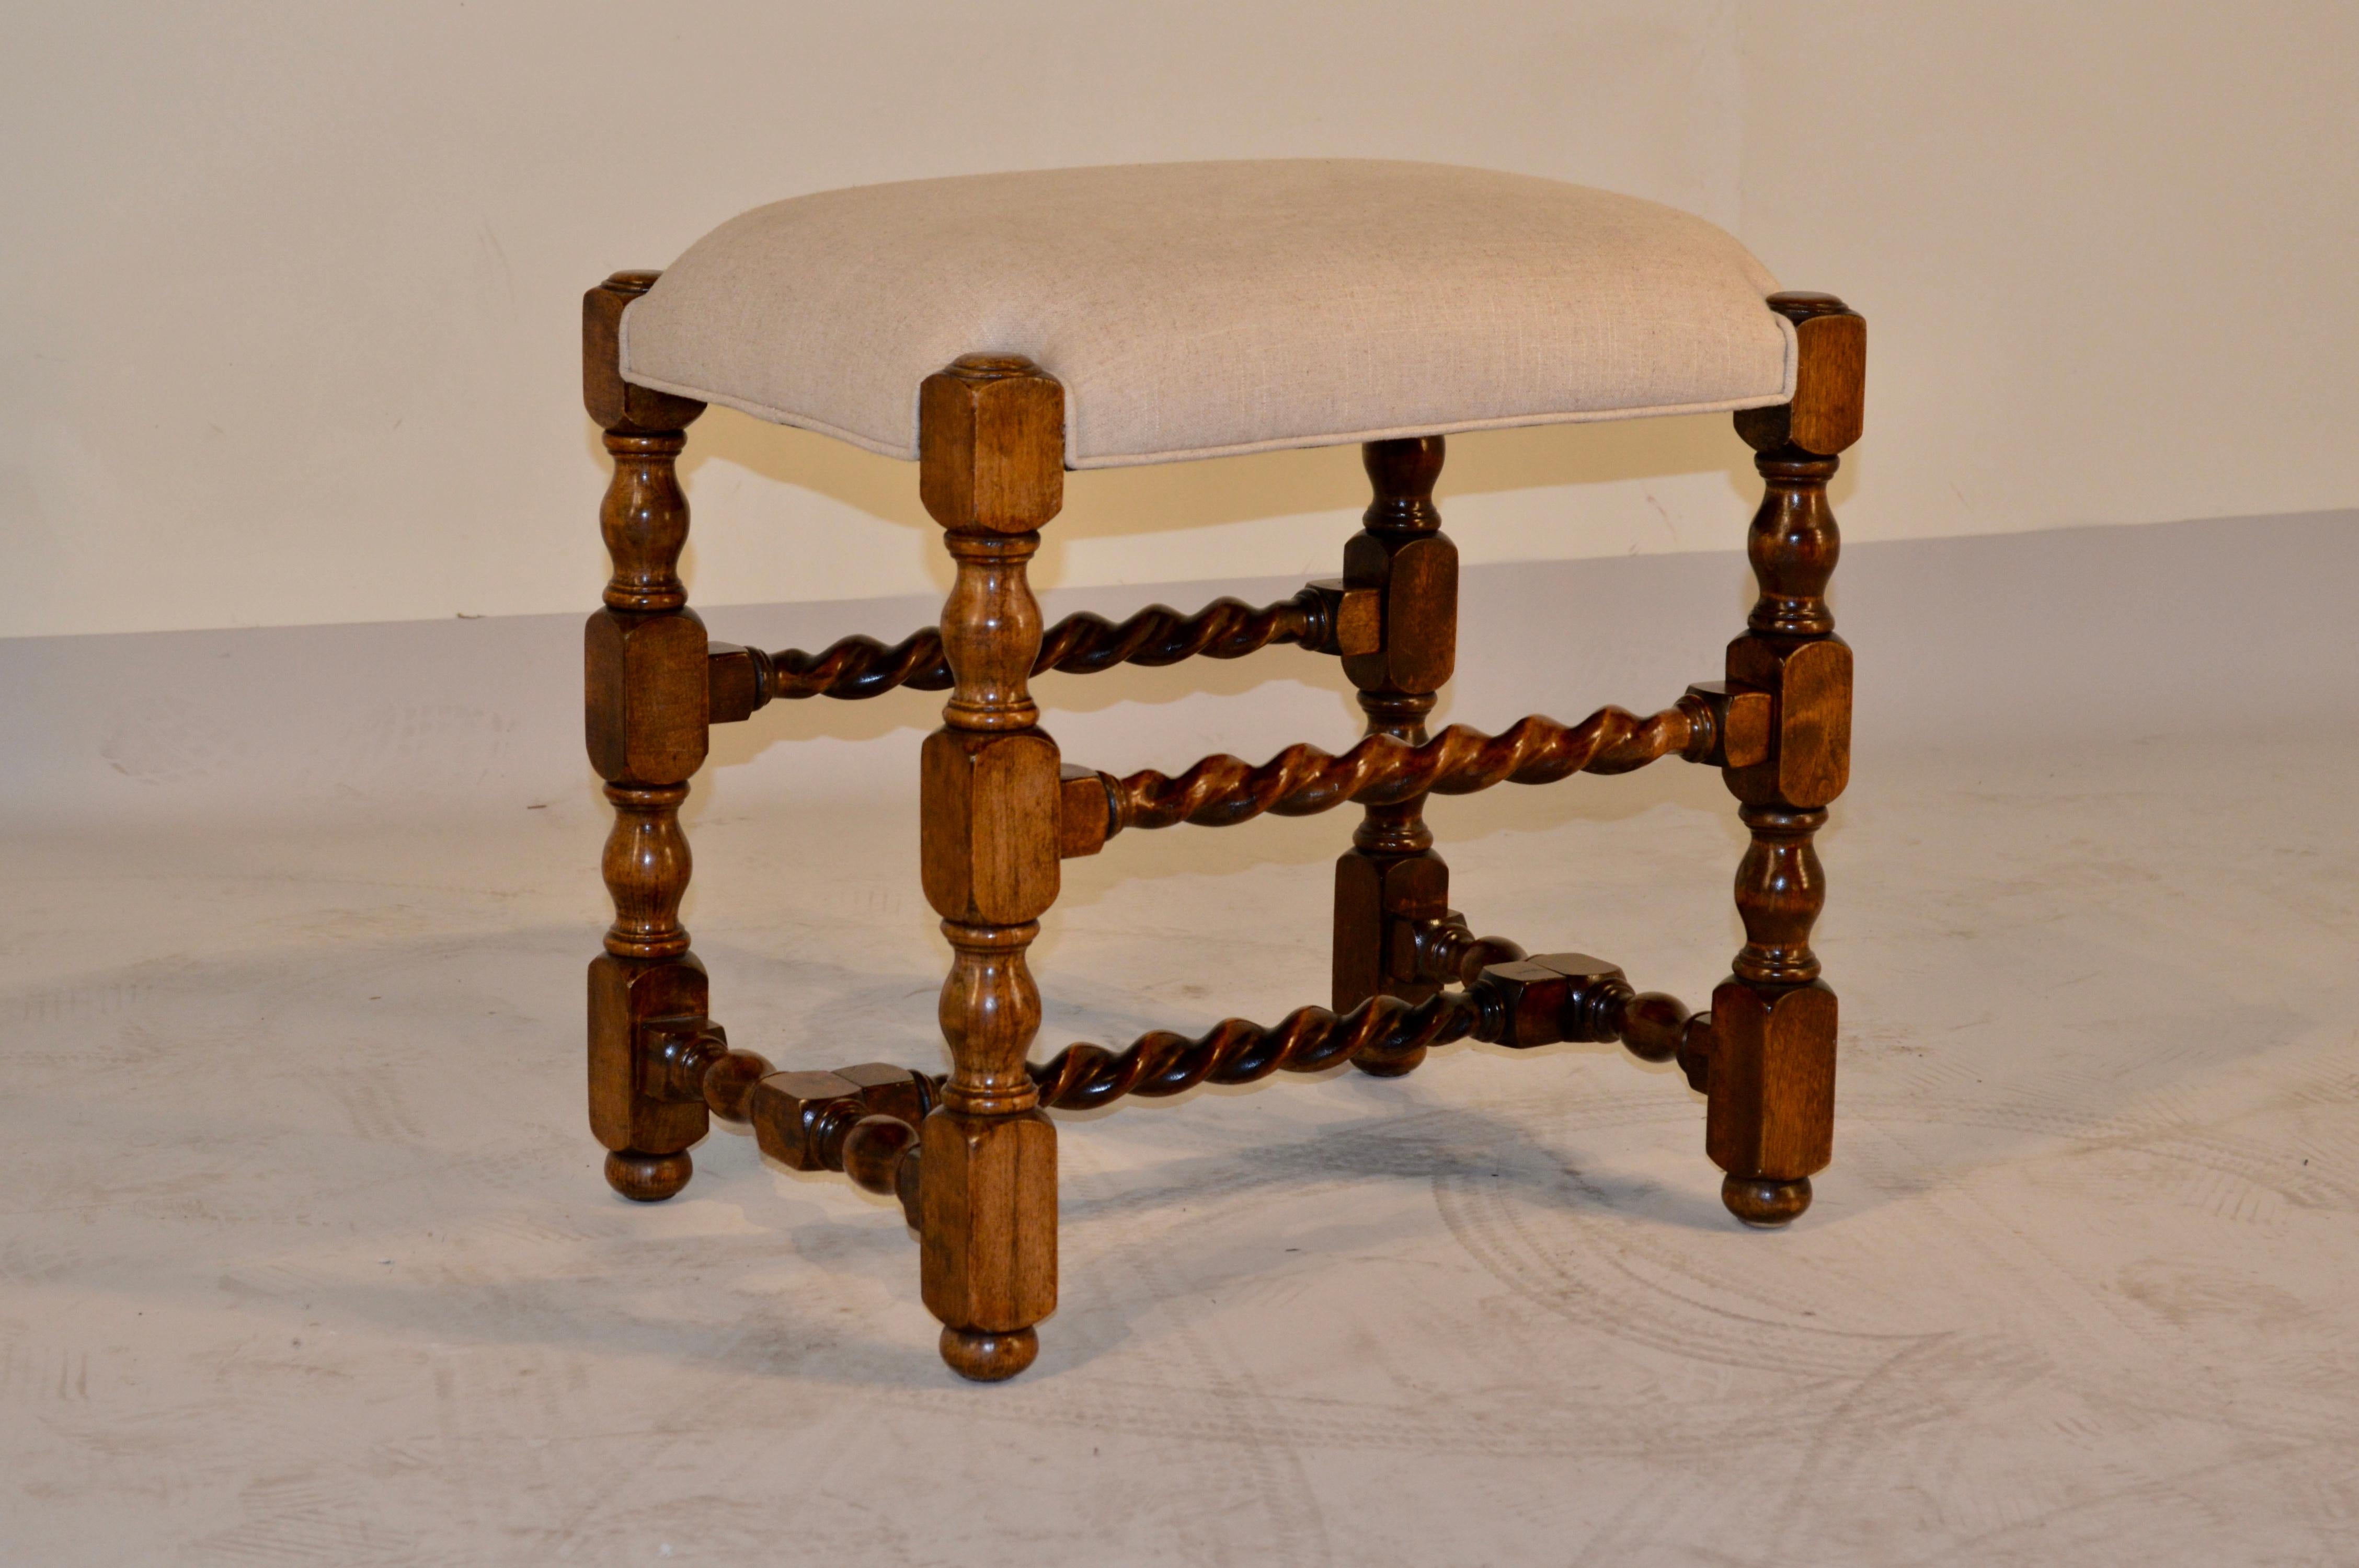 Late 19th century English oak turned stool with nicely hand turned legs and barley twist joining stretchers.  Raised on turned feet.  There is shrinkage in one leg.  The seat has been newly upholstered in linen and is finished with a single welt.